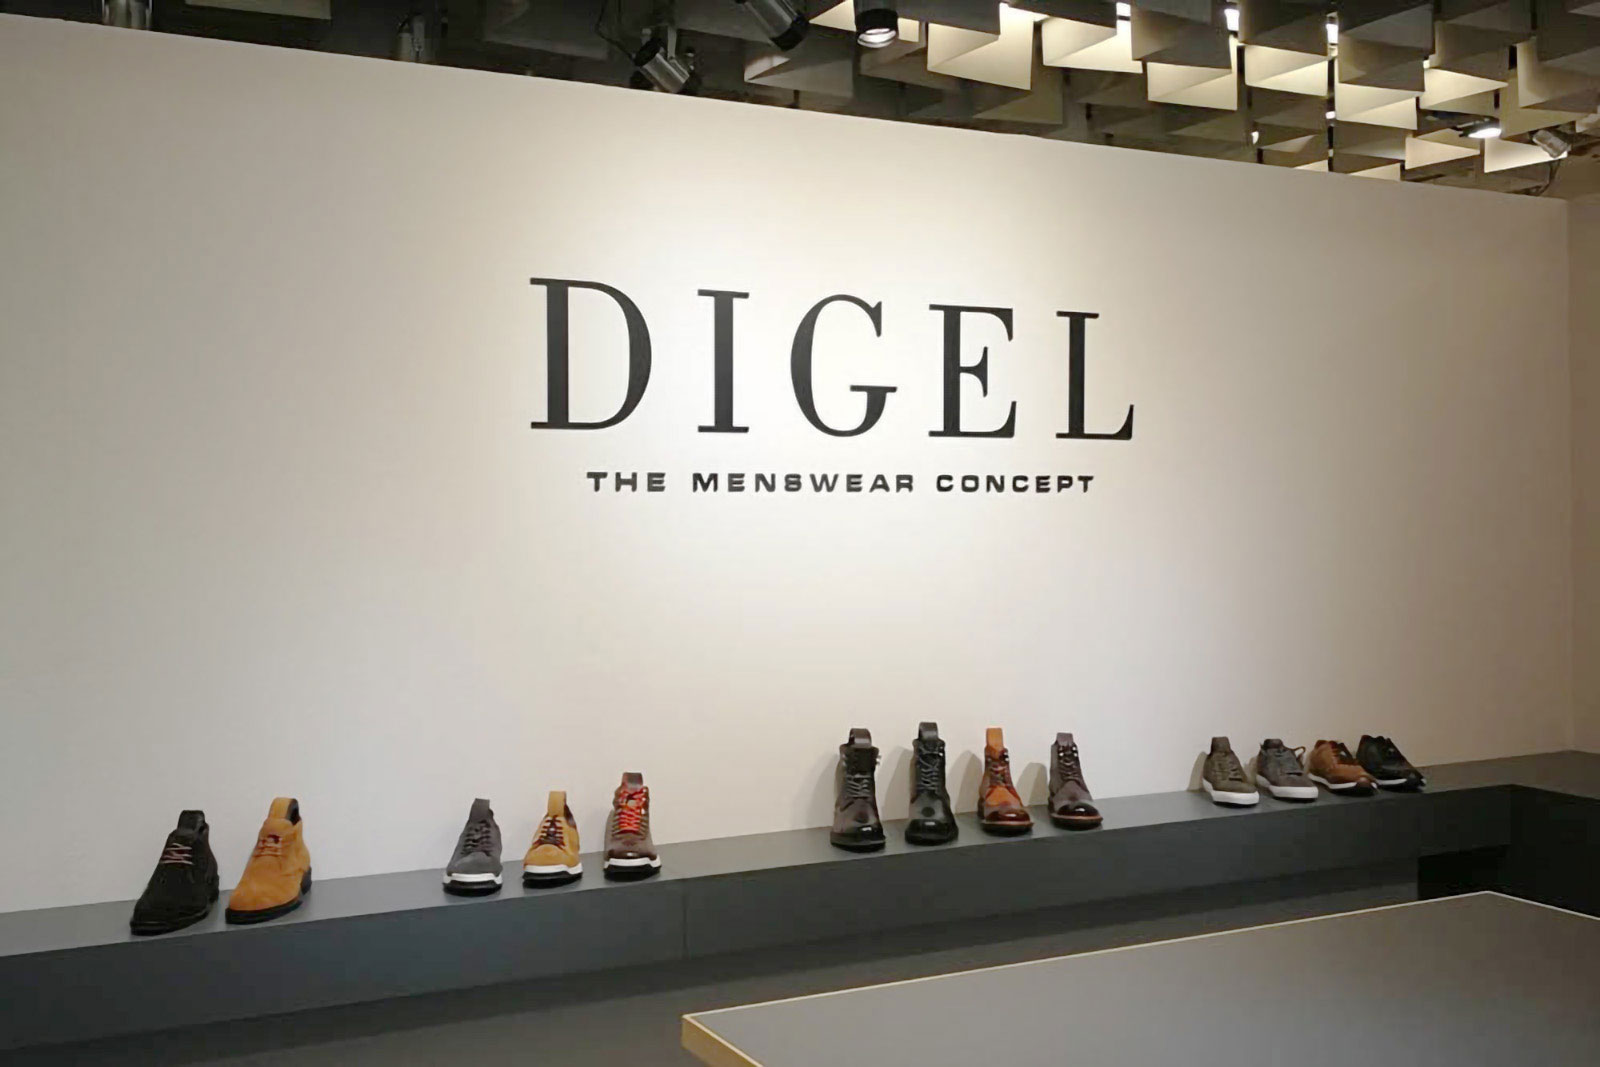 Digel stand exhibition fittings by Aetes Group International